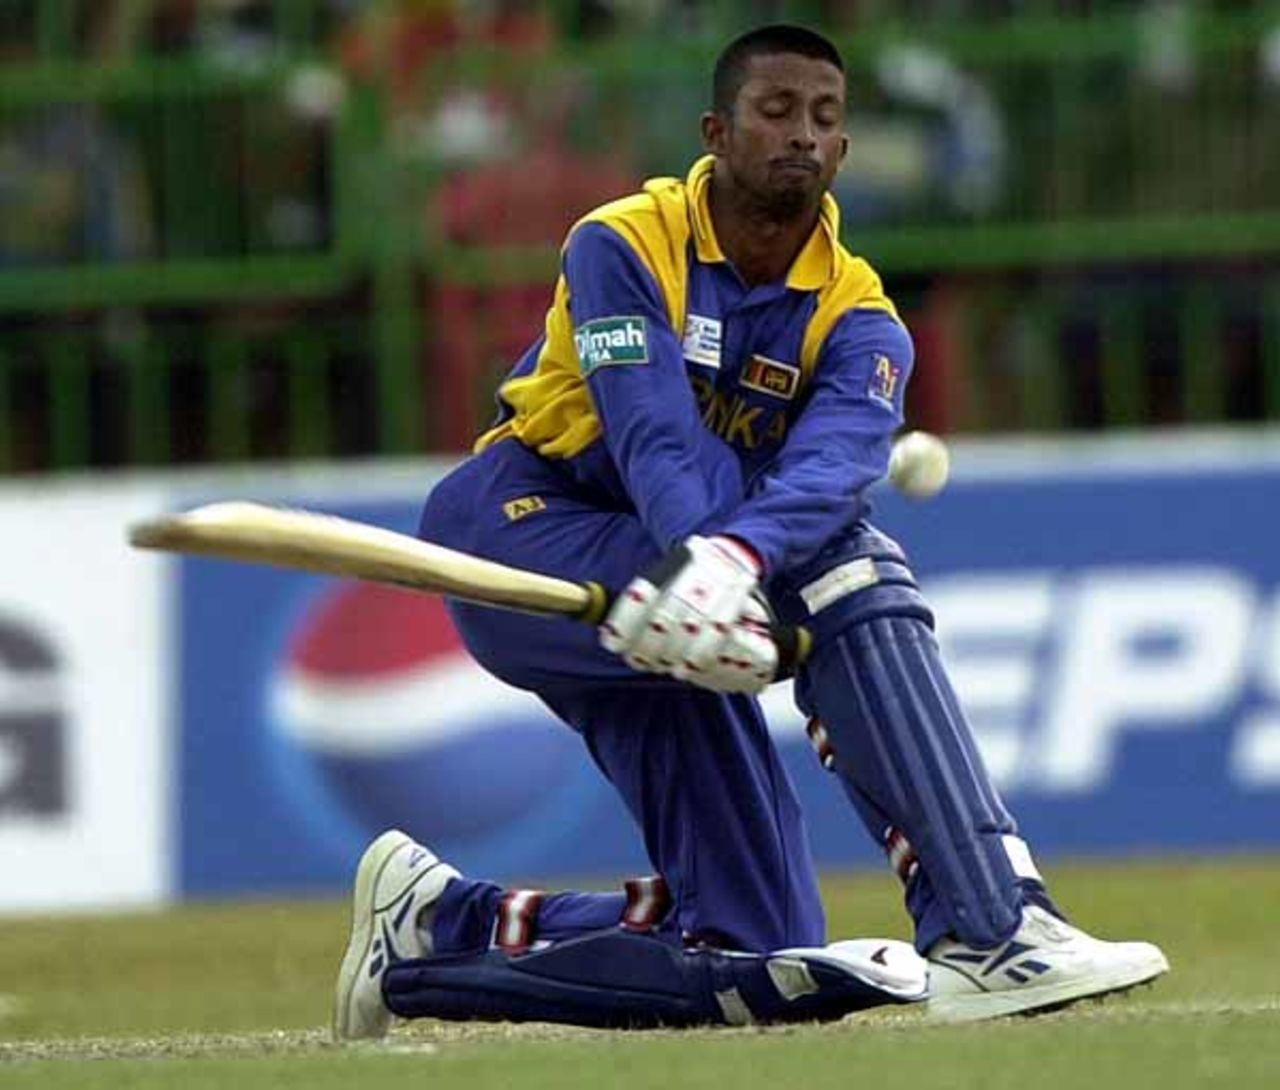 ICC Champions Trophy, India v Sri Lanka, Final Replay, 30th September 2002, Colombo (RPS)